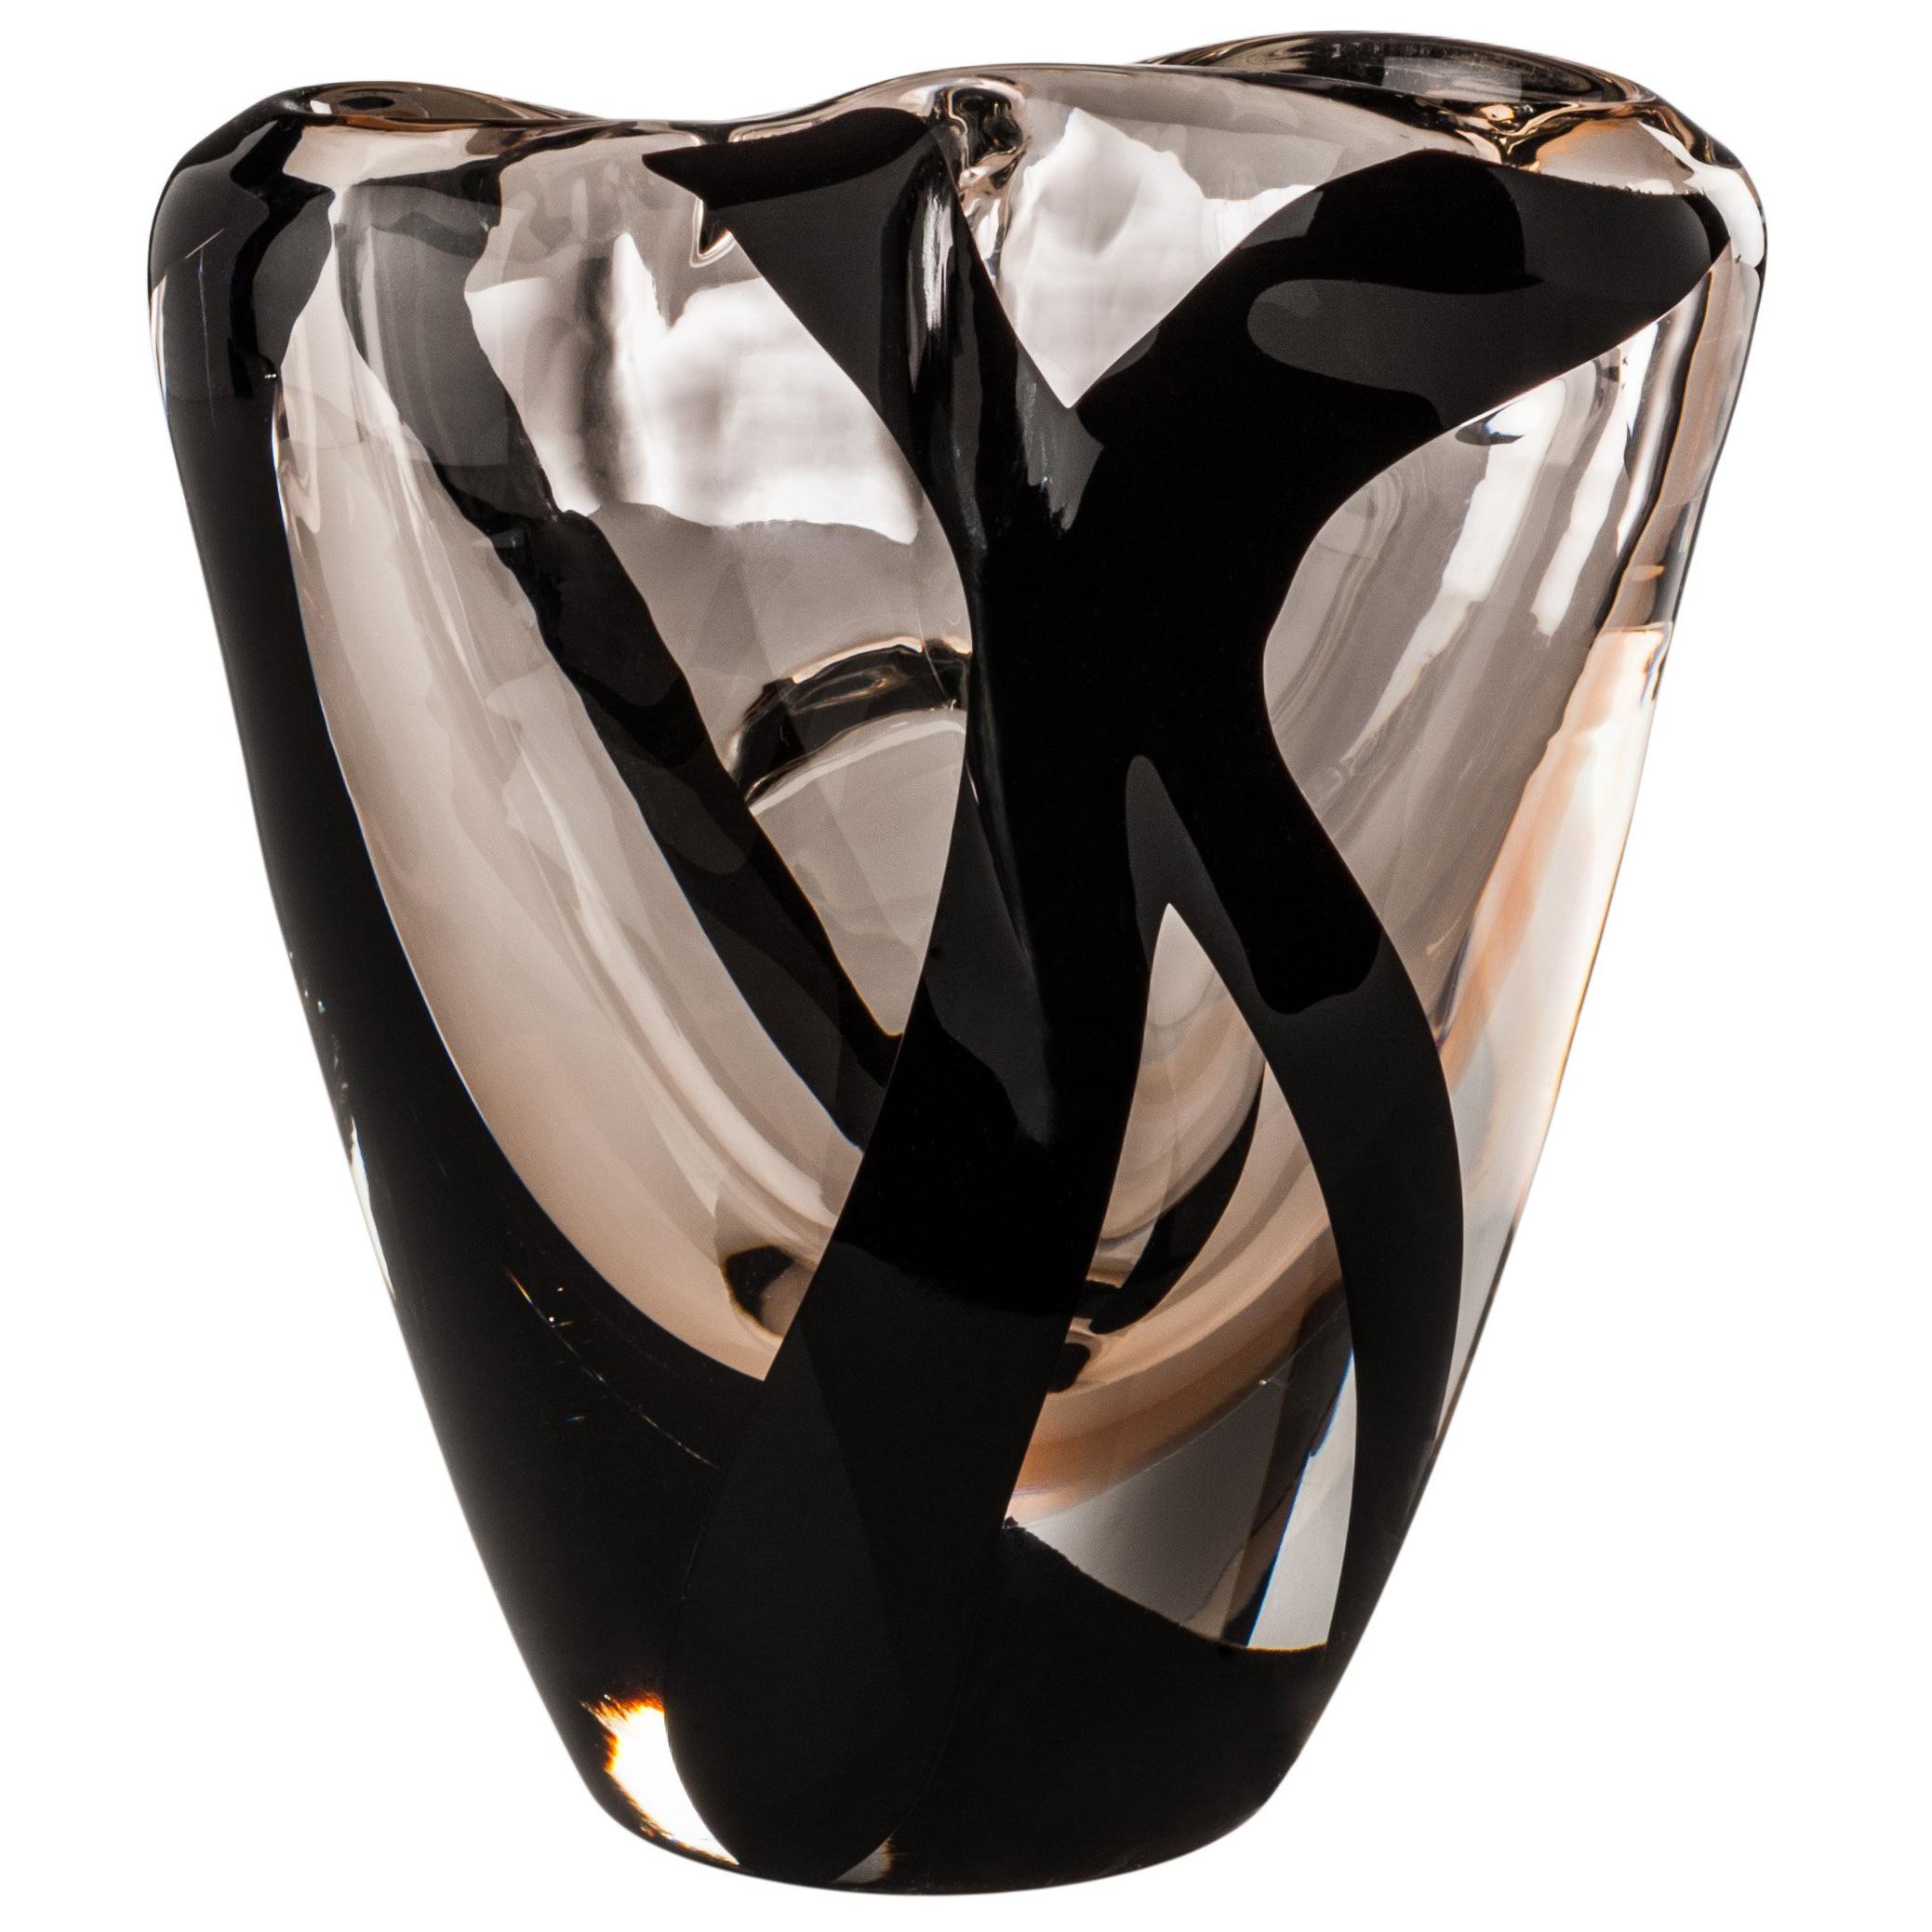 Venini Black Belt Otto Short Glass Vase in Crystal and LightPink by Peter Marino For Sale